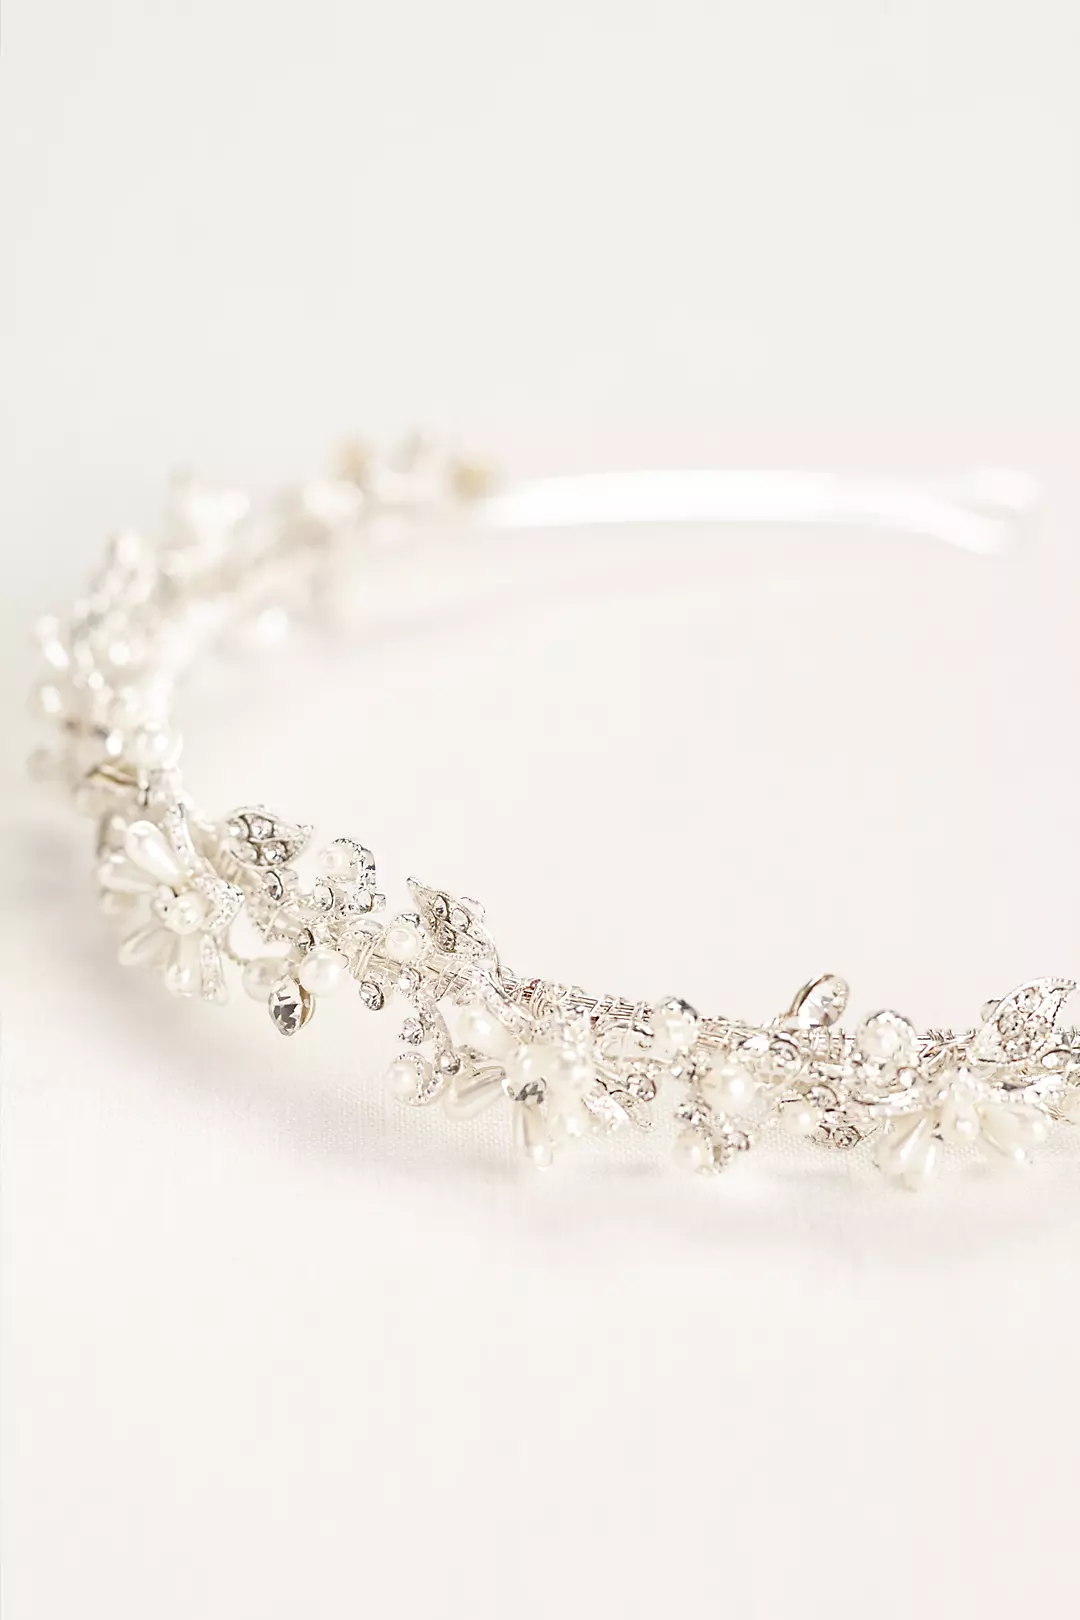 Bridal Headband with Crystals and Pearl Flowers Image 2